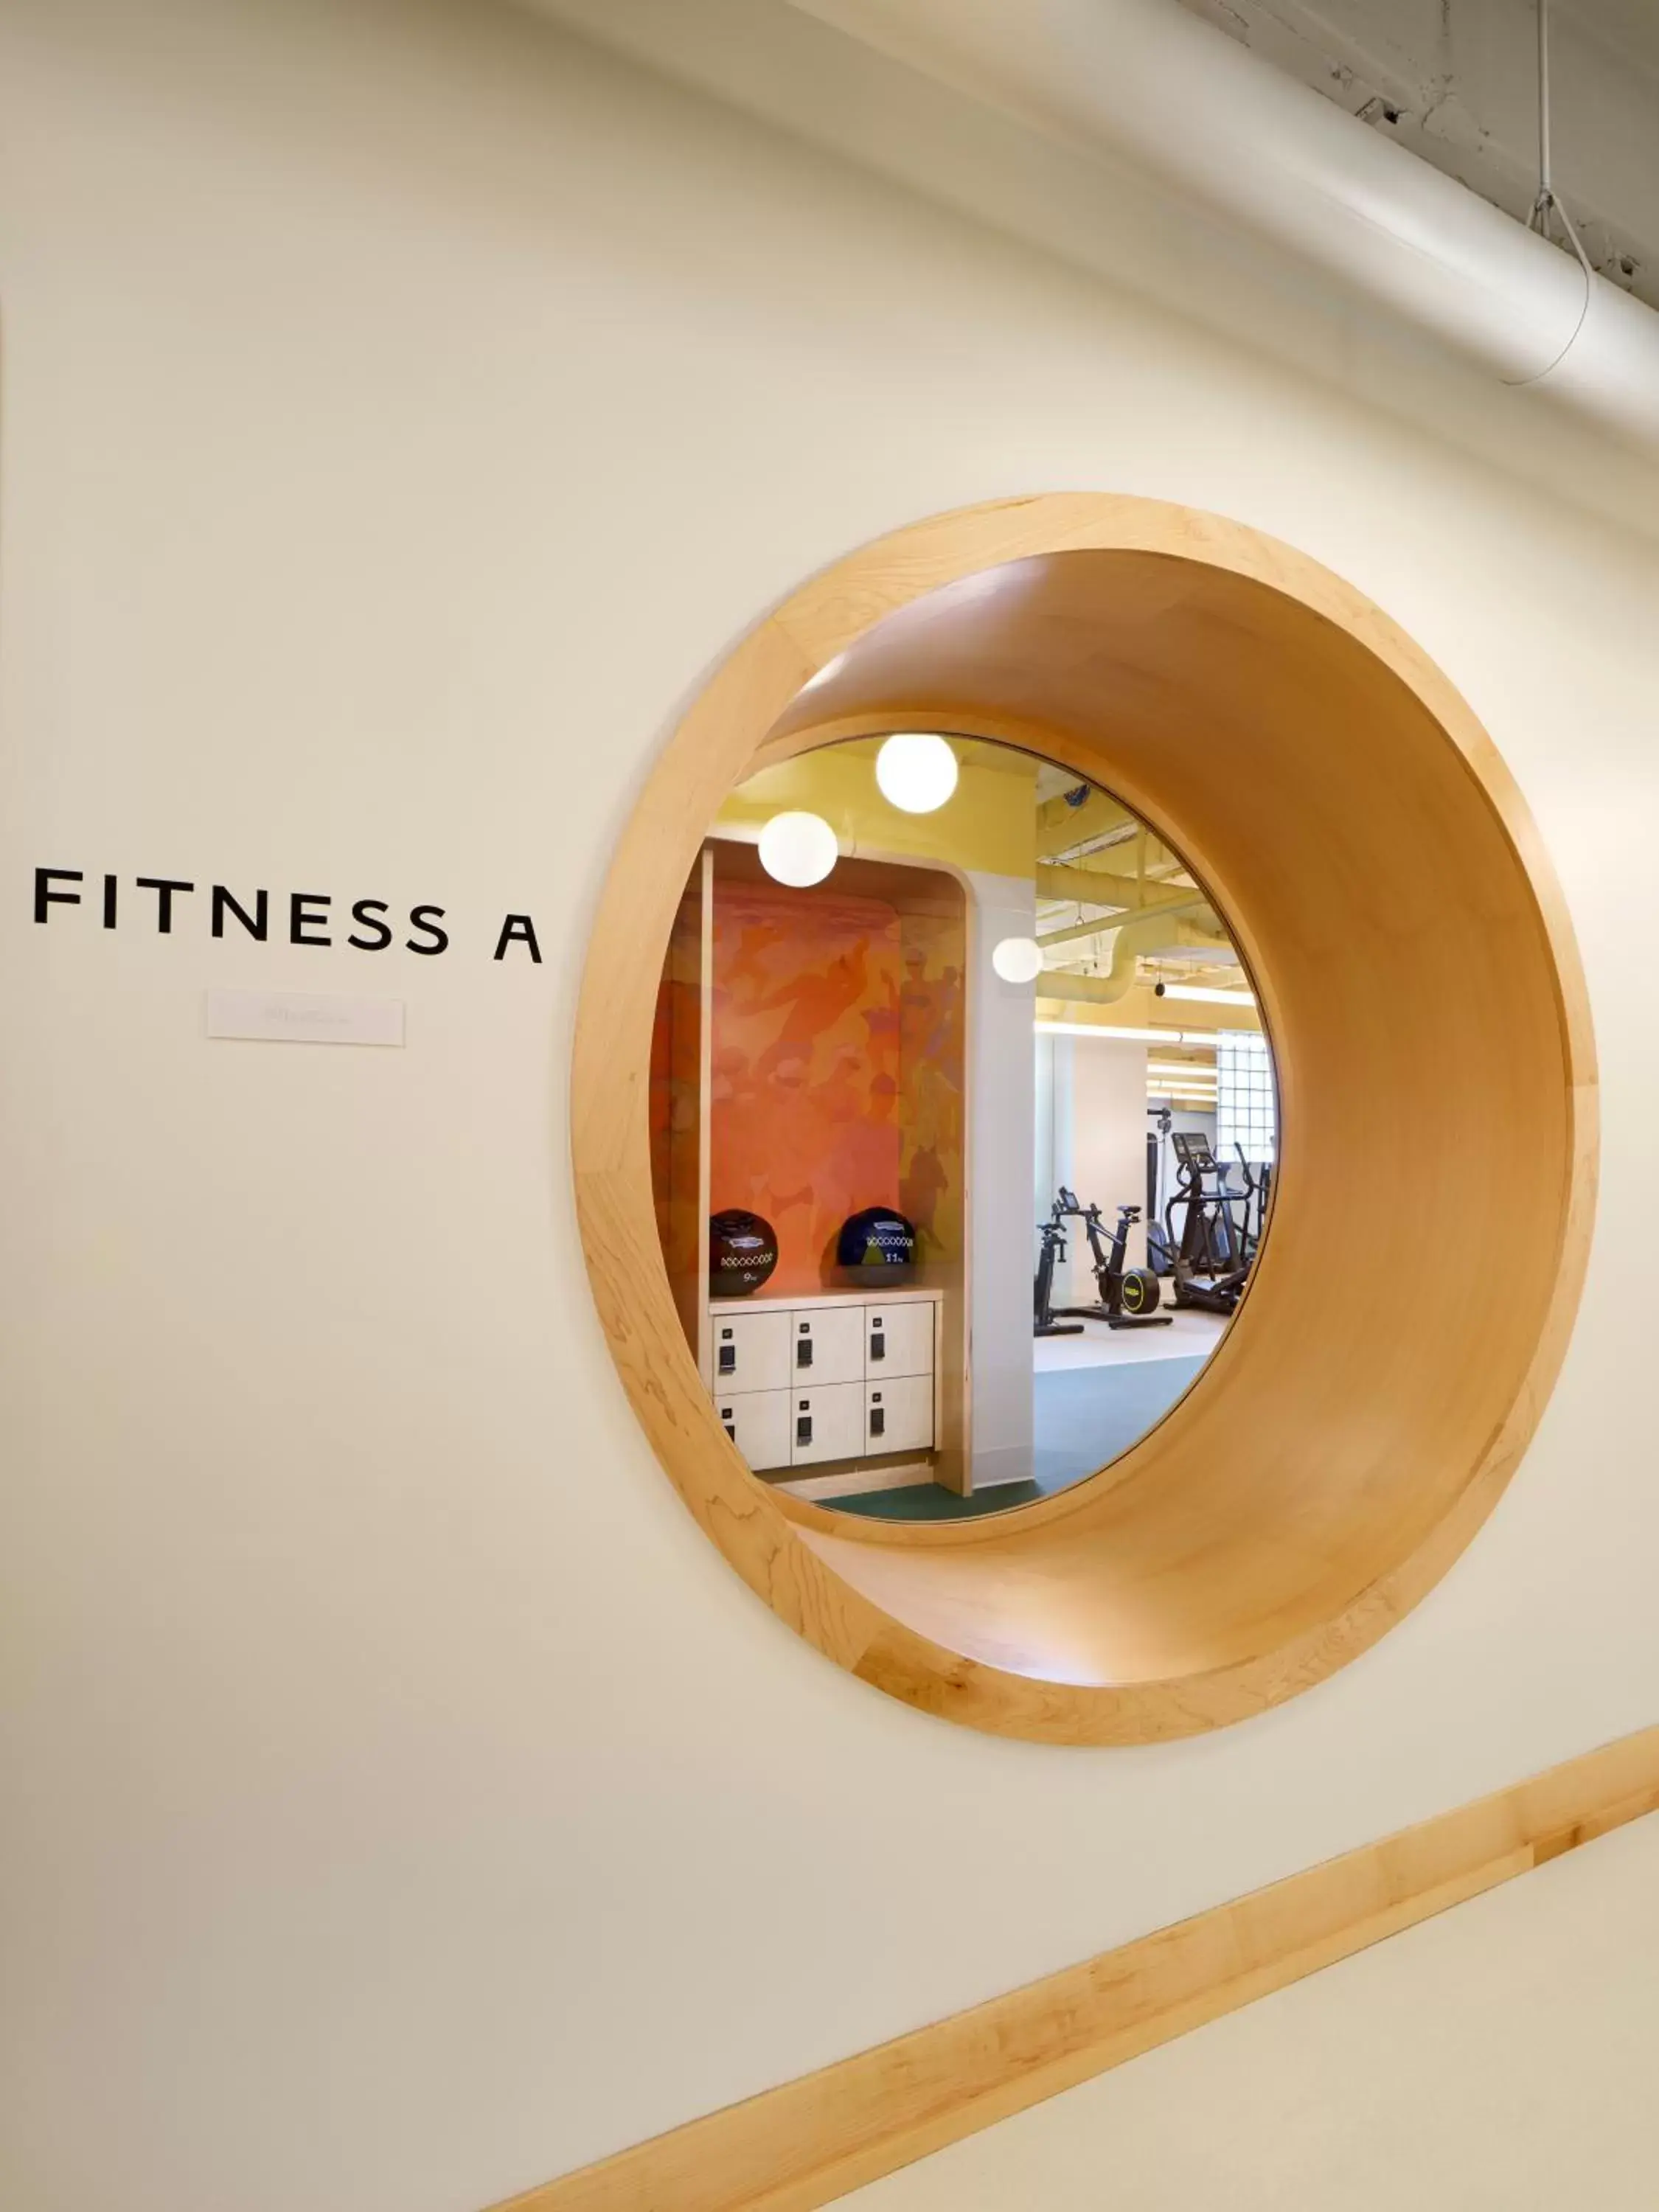 Fitness centre/facilities in 21c Museum Hotel St Louis